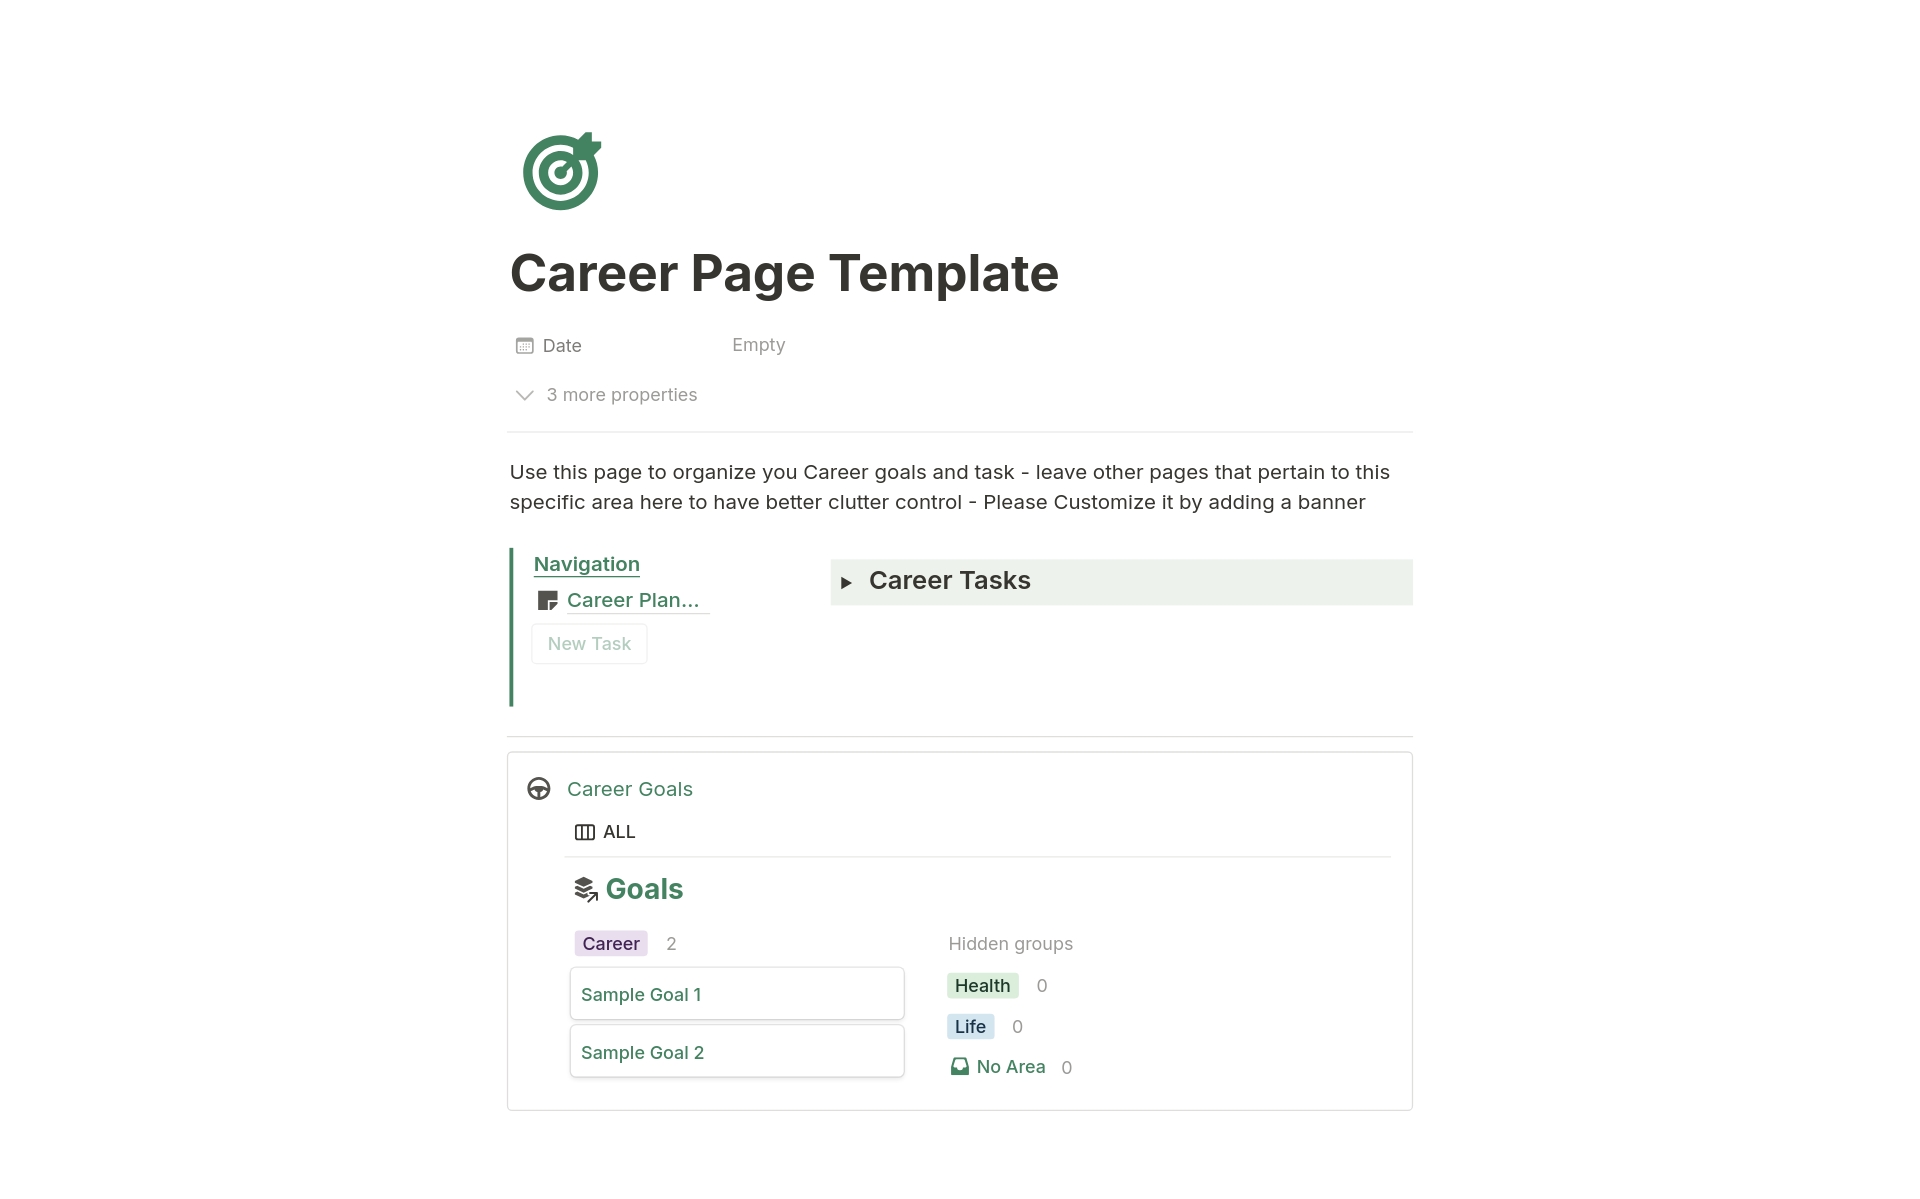 Transform your career planning with this comprehensive Career Page Template for Notion. Organize your career goals, track tasks, and manage your professional development efficiently.